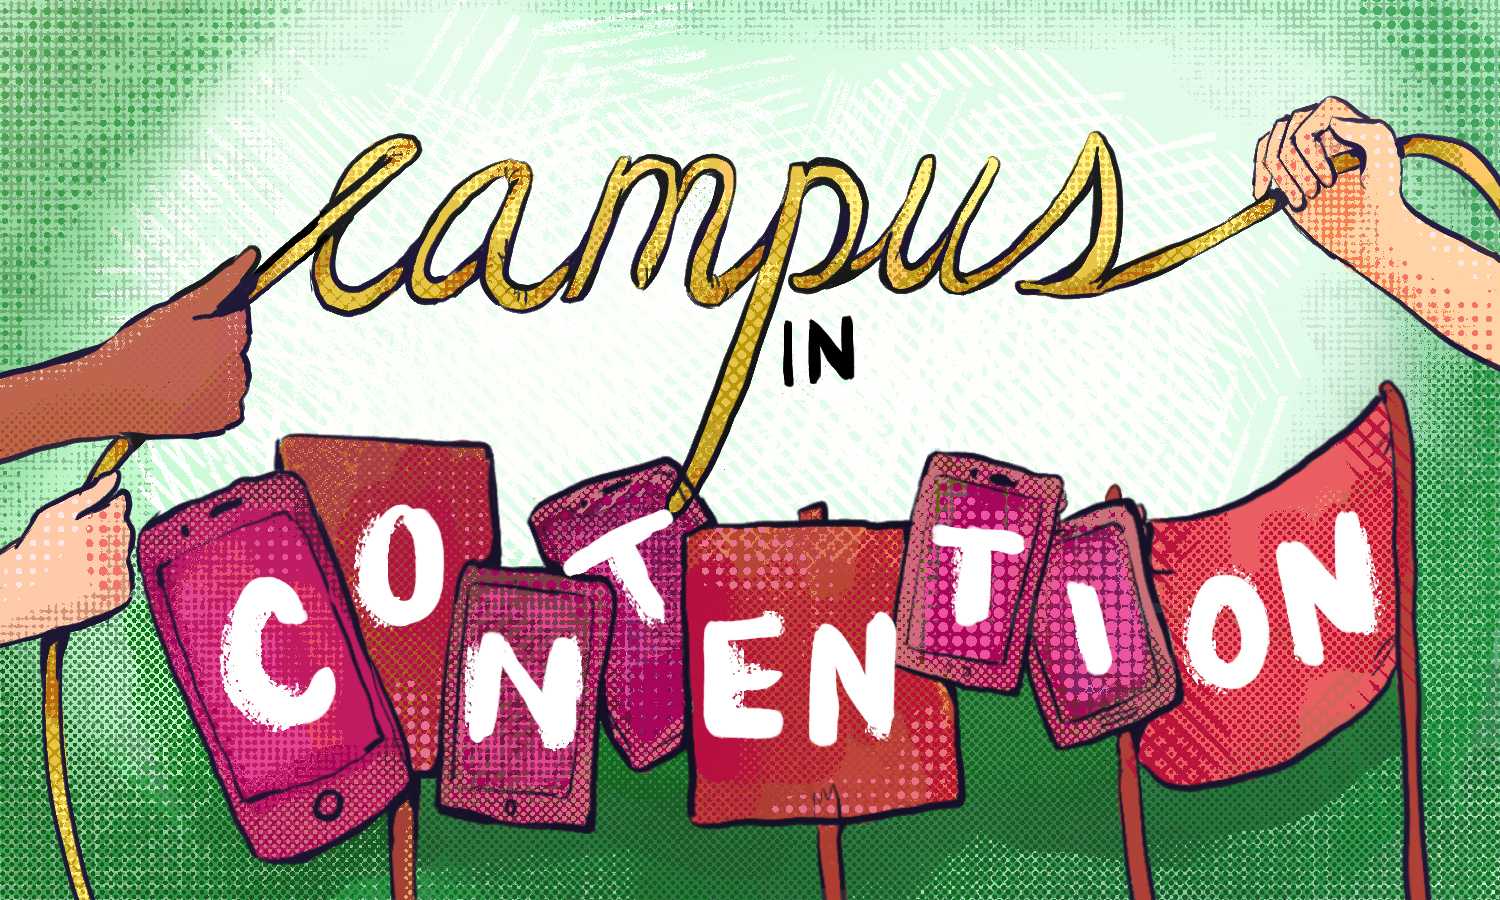 graphic illustration of hands pulling at a rope that spells out Campus with the words In Contention underneath it in sign posts and cell phones